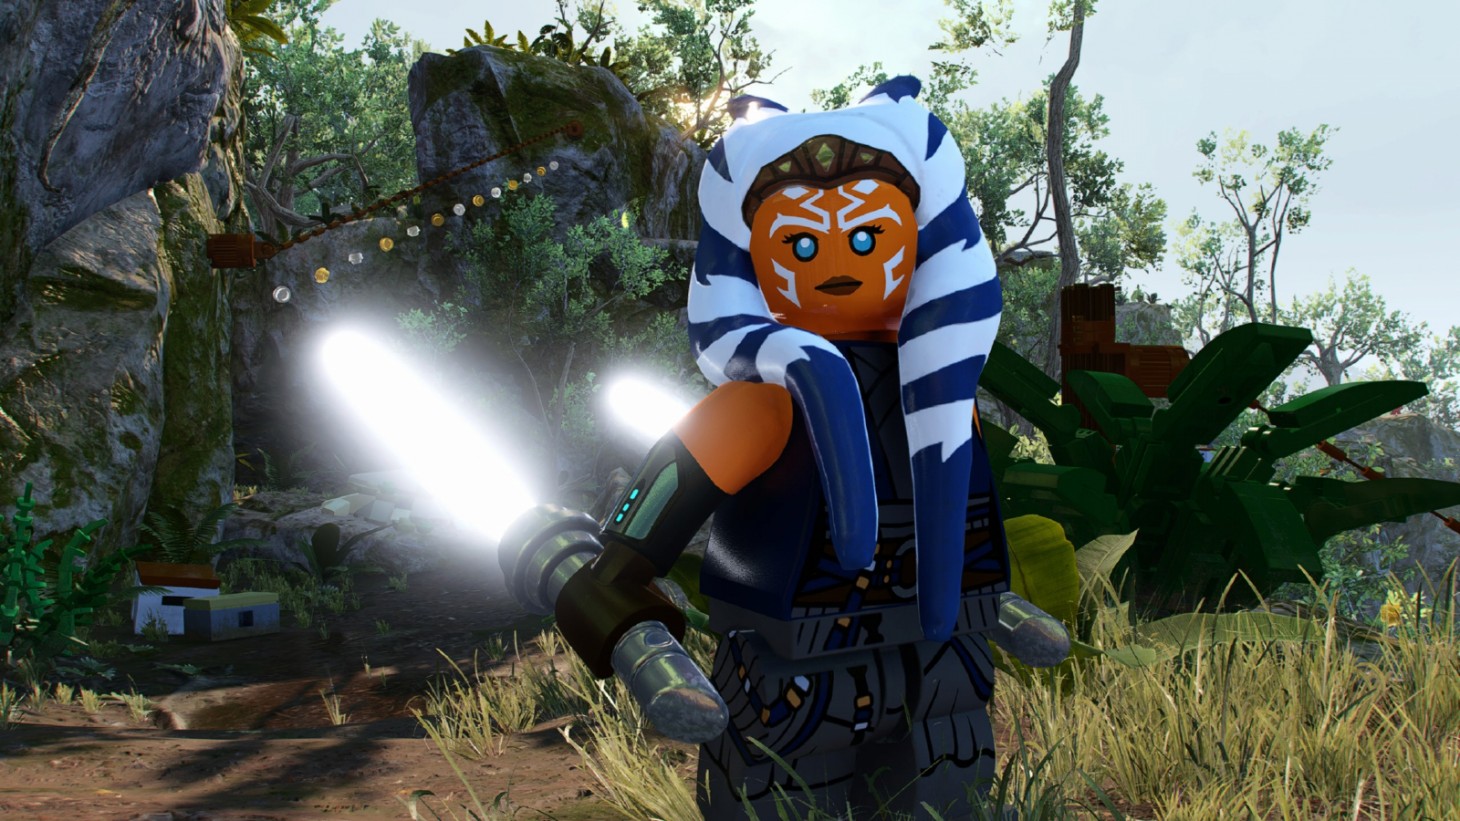 Lego Star Wars: The Skywalker Saga Celebrates Star Wars Day With Two New Character Packs 